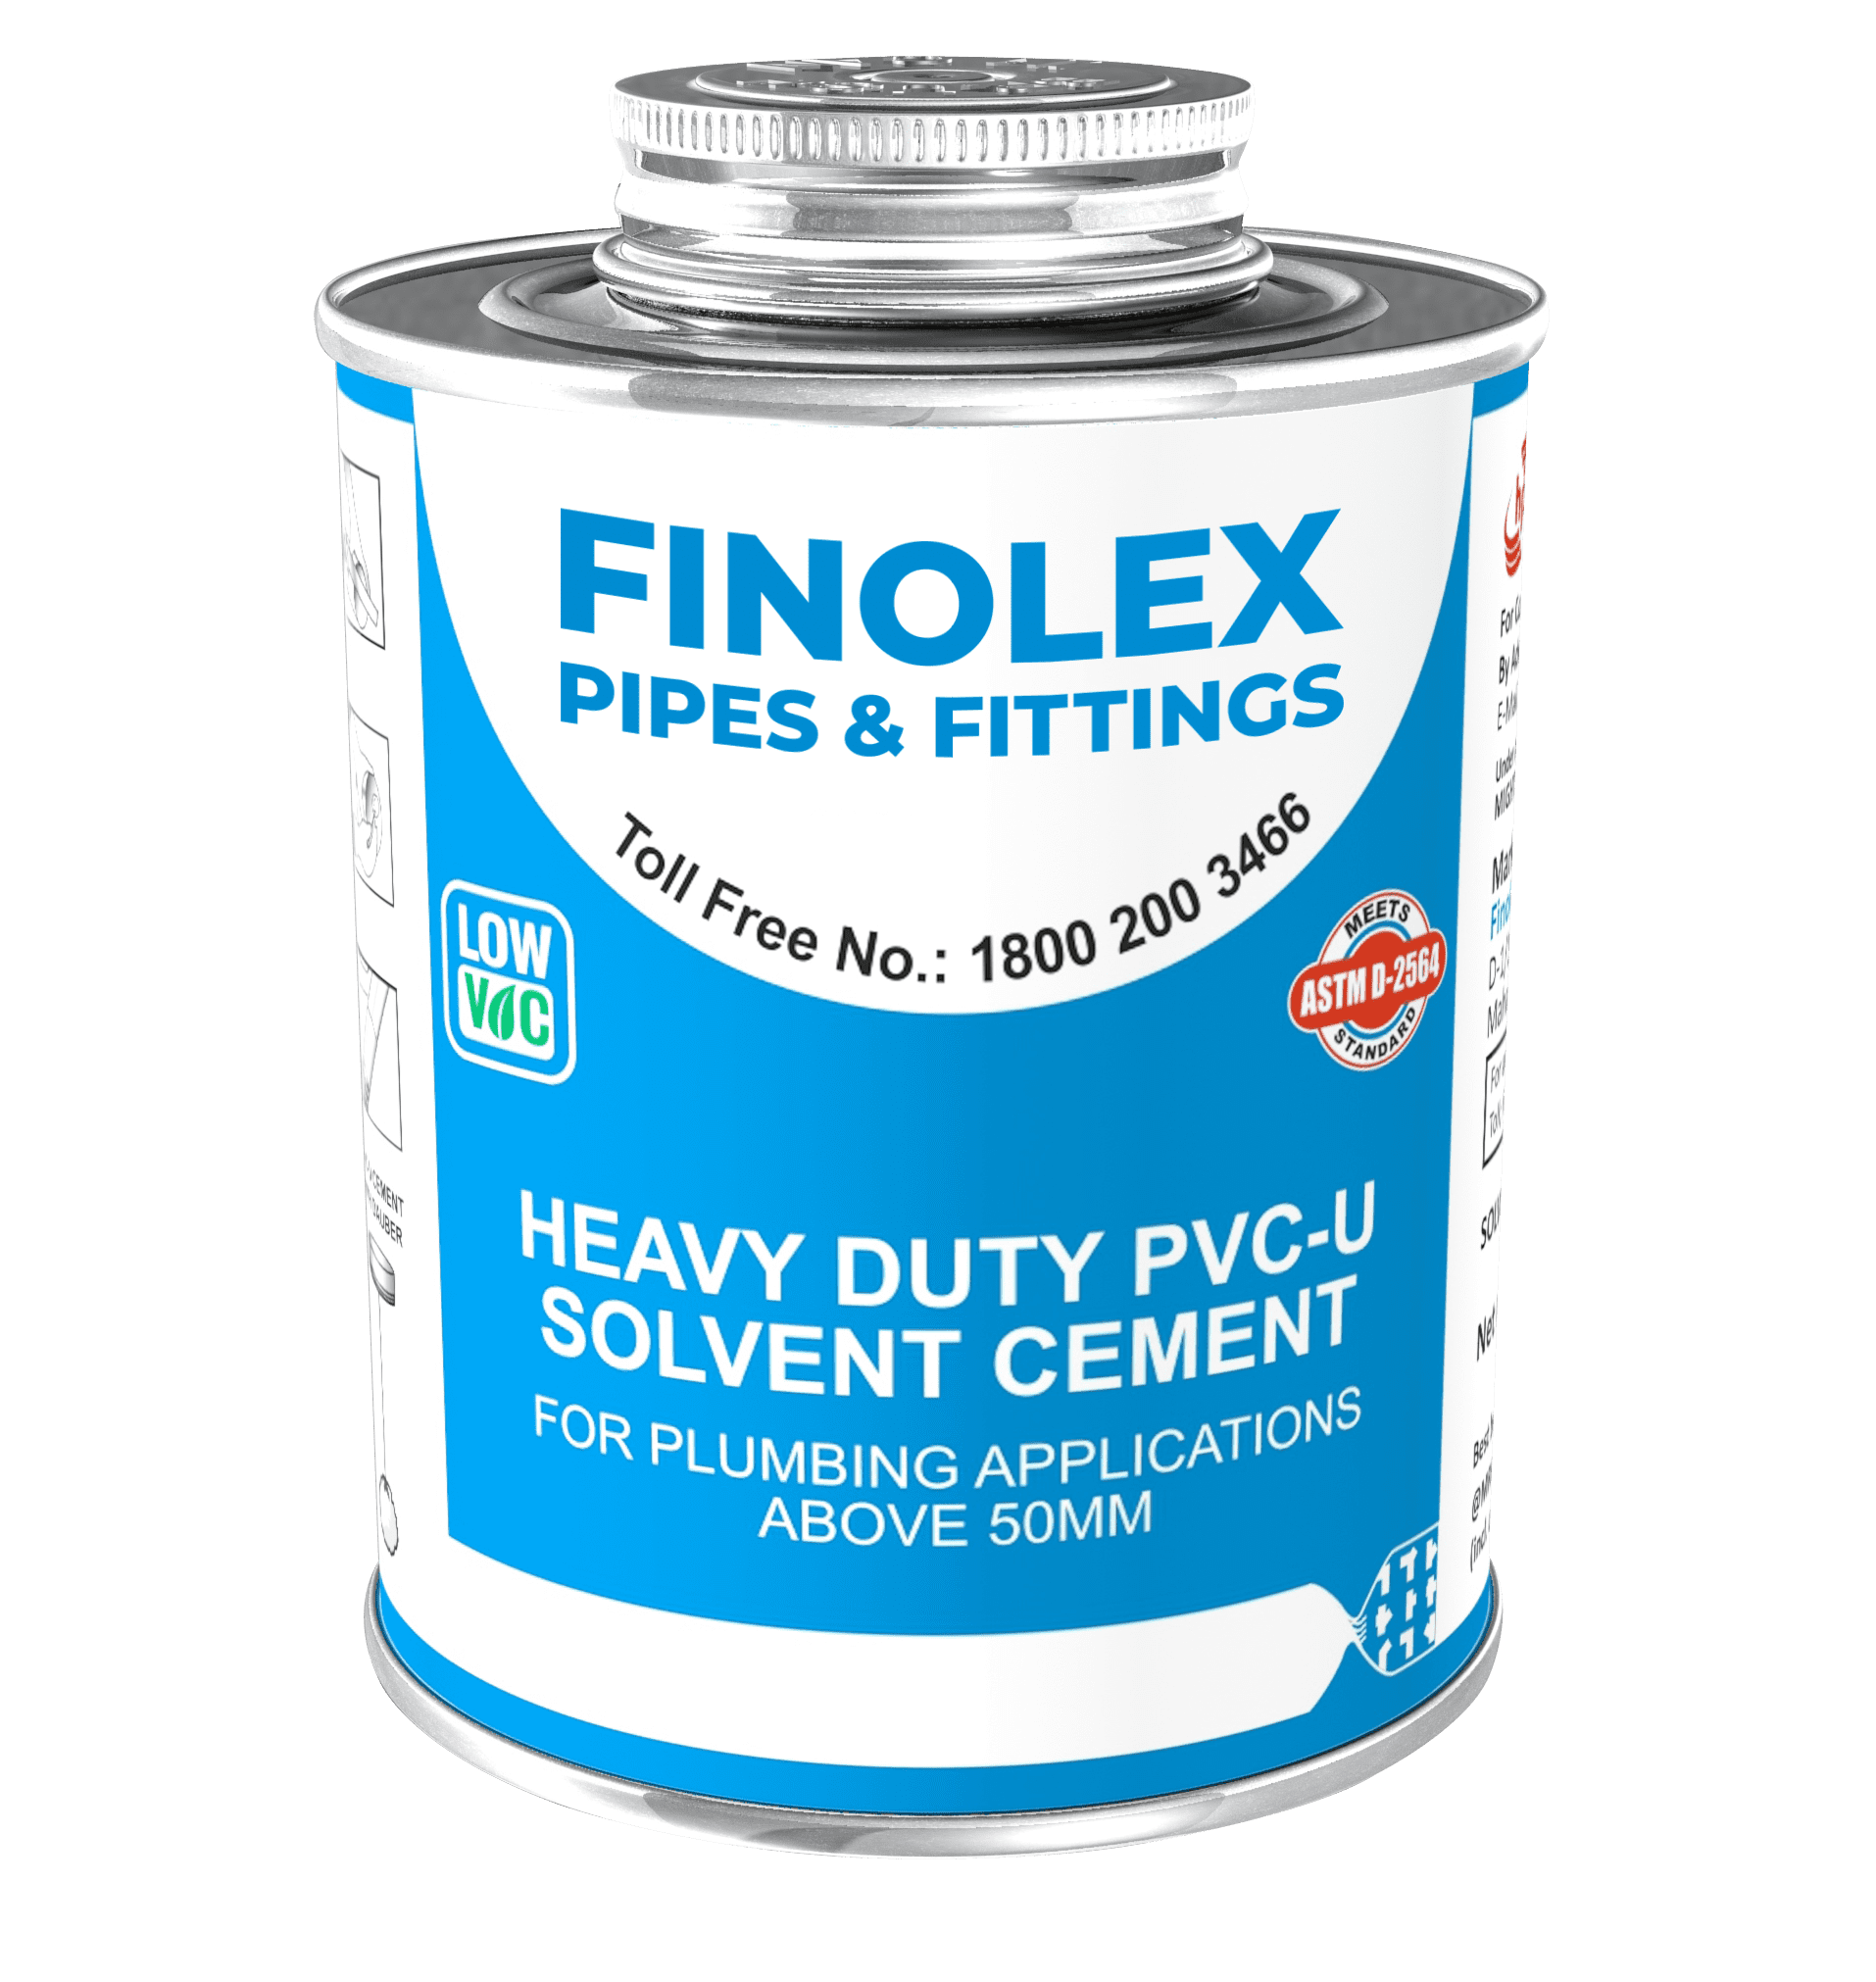 heavy duty pvc-u solvent cement for plumbing applications above 50mm (2″)